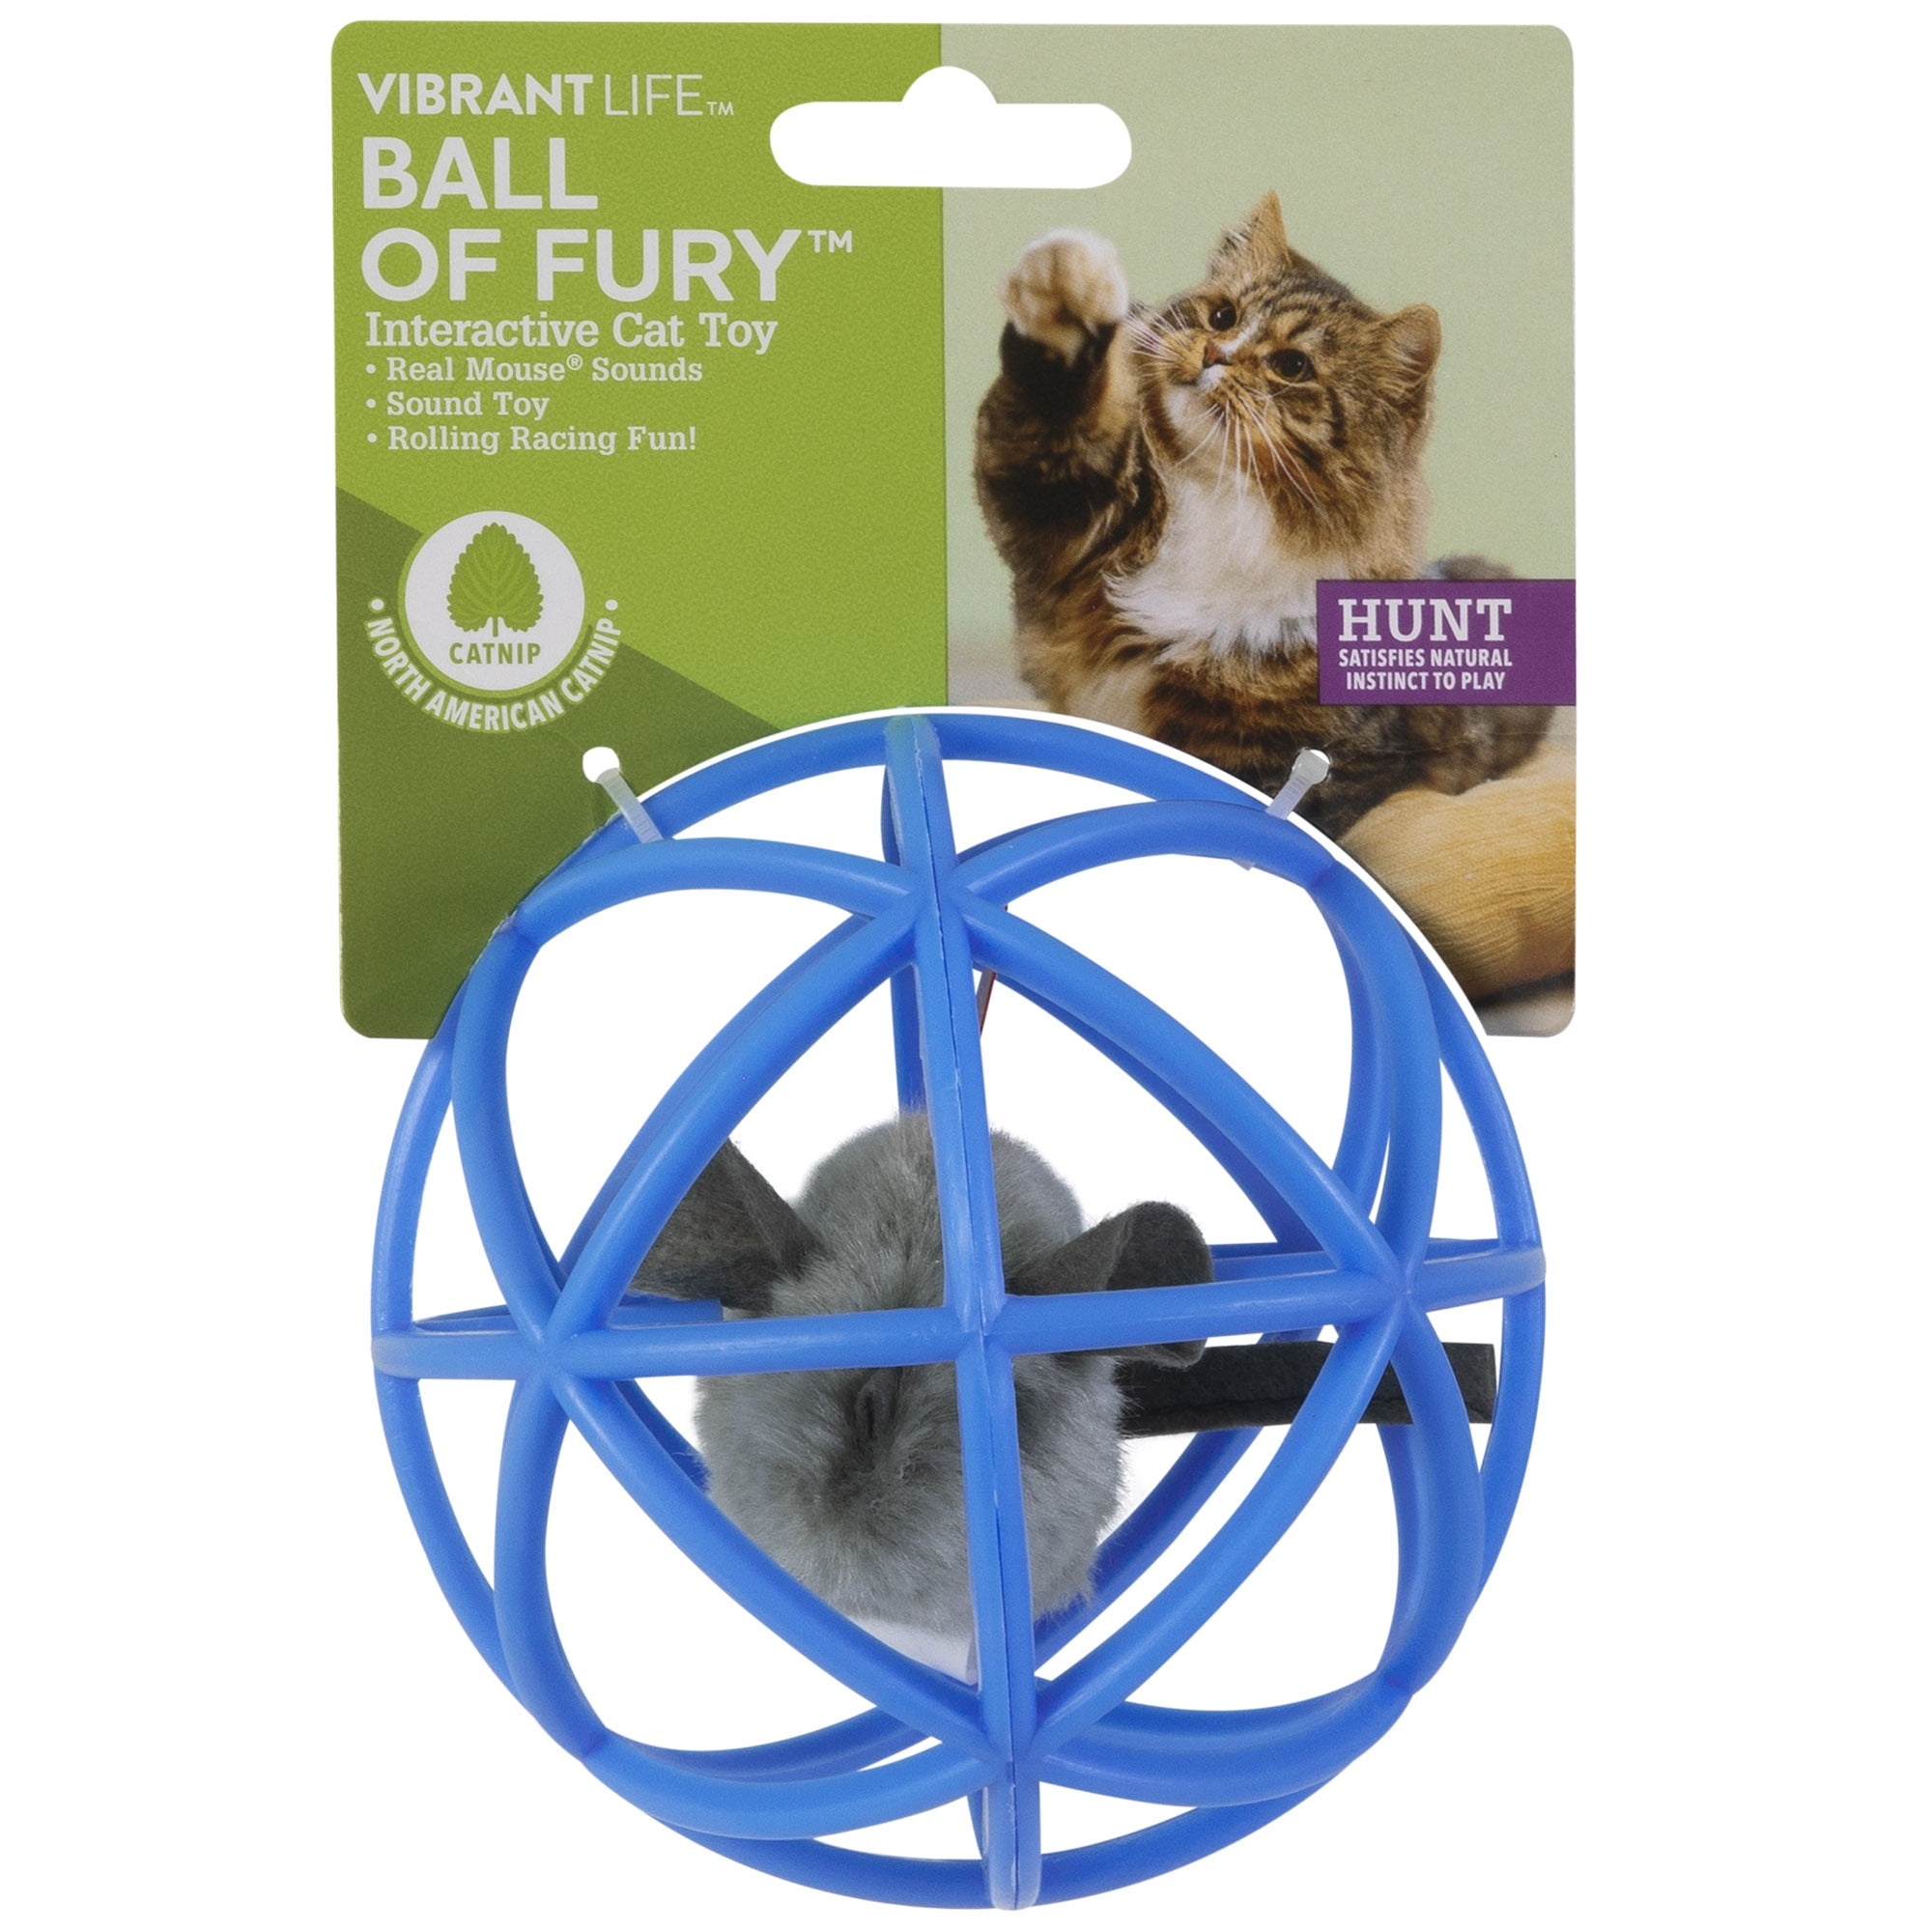 Vibrant Life Ball of Fury Interactive Squeaking Mouse Cat Toy for Cats and Kittens